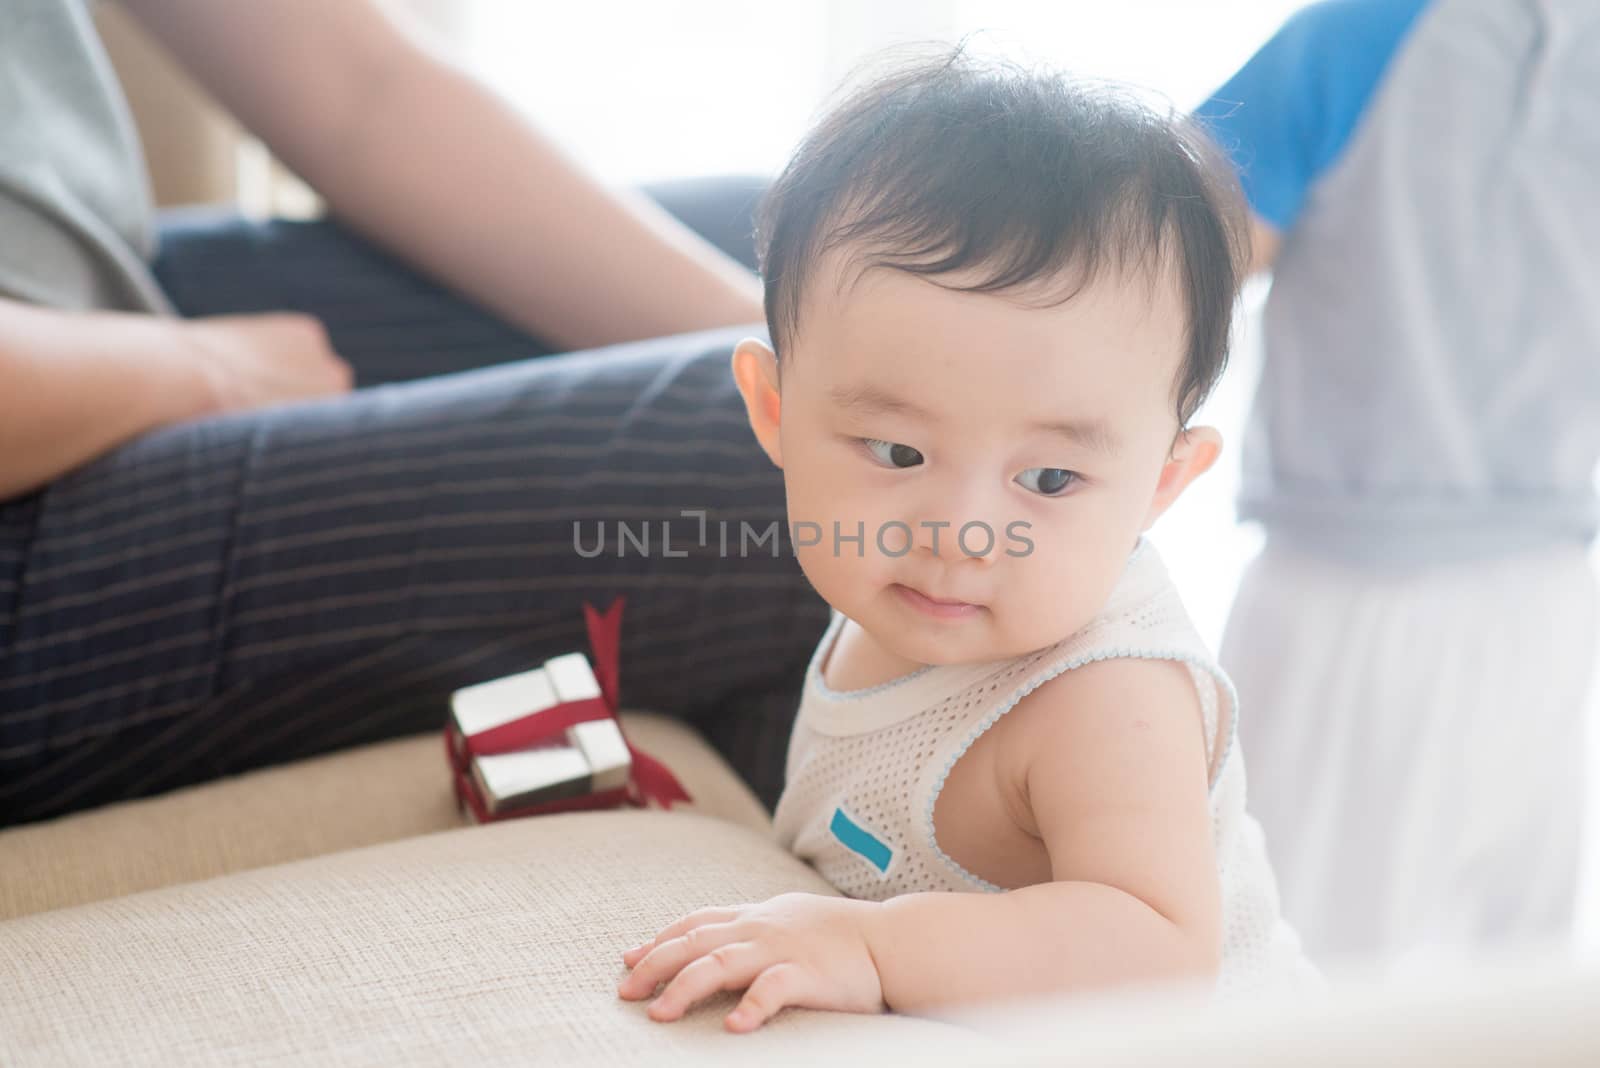 Nine months old baby boy holding sofa and learning how to walk. Asian family at home, living lifestyle indoors.